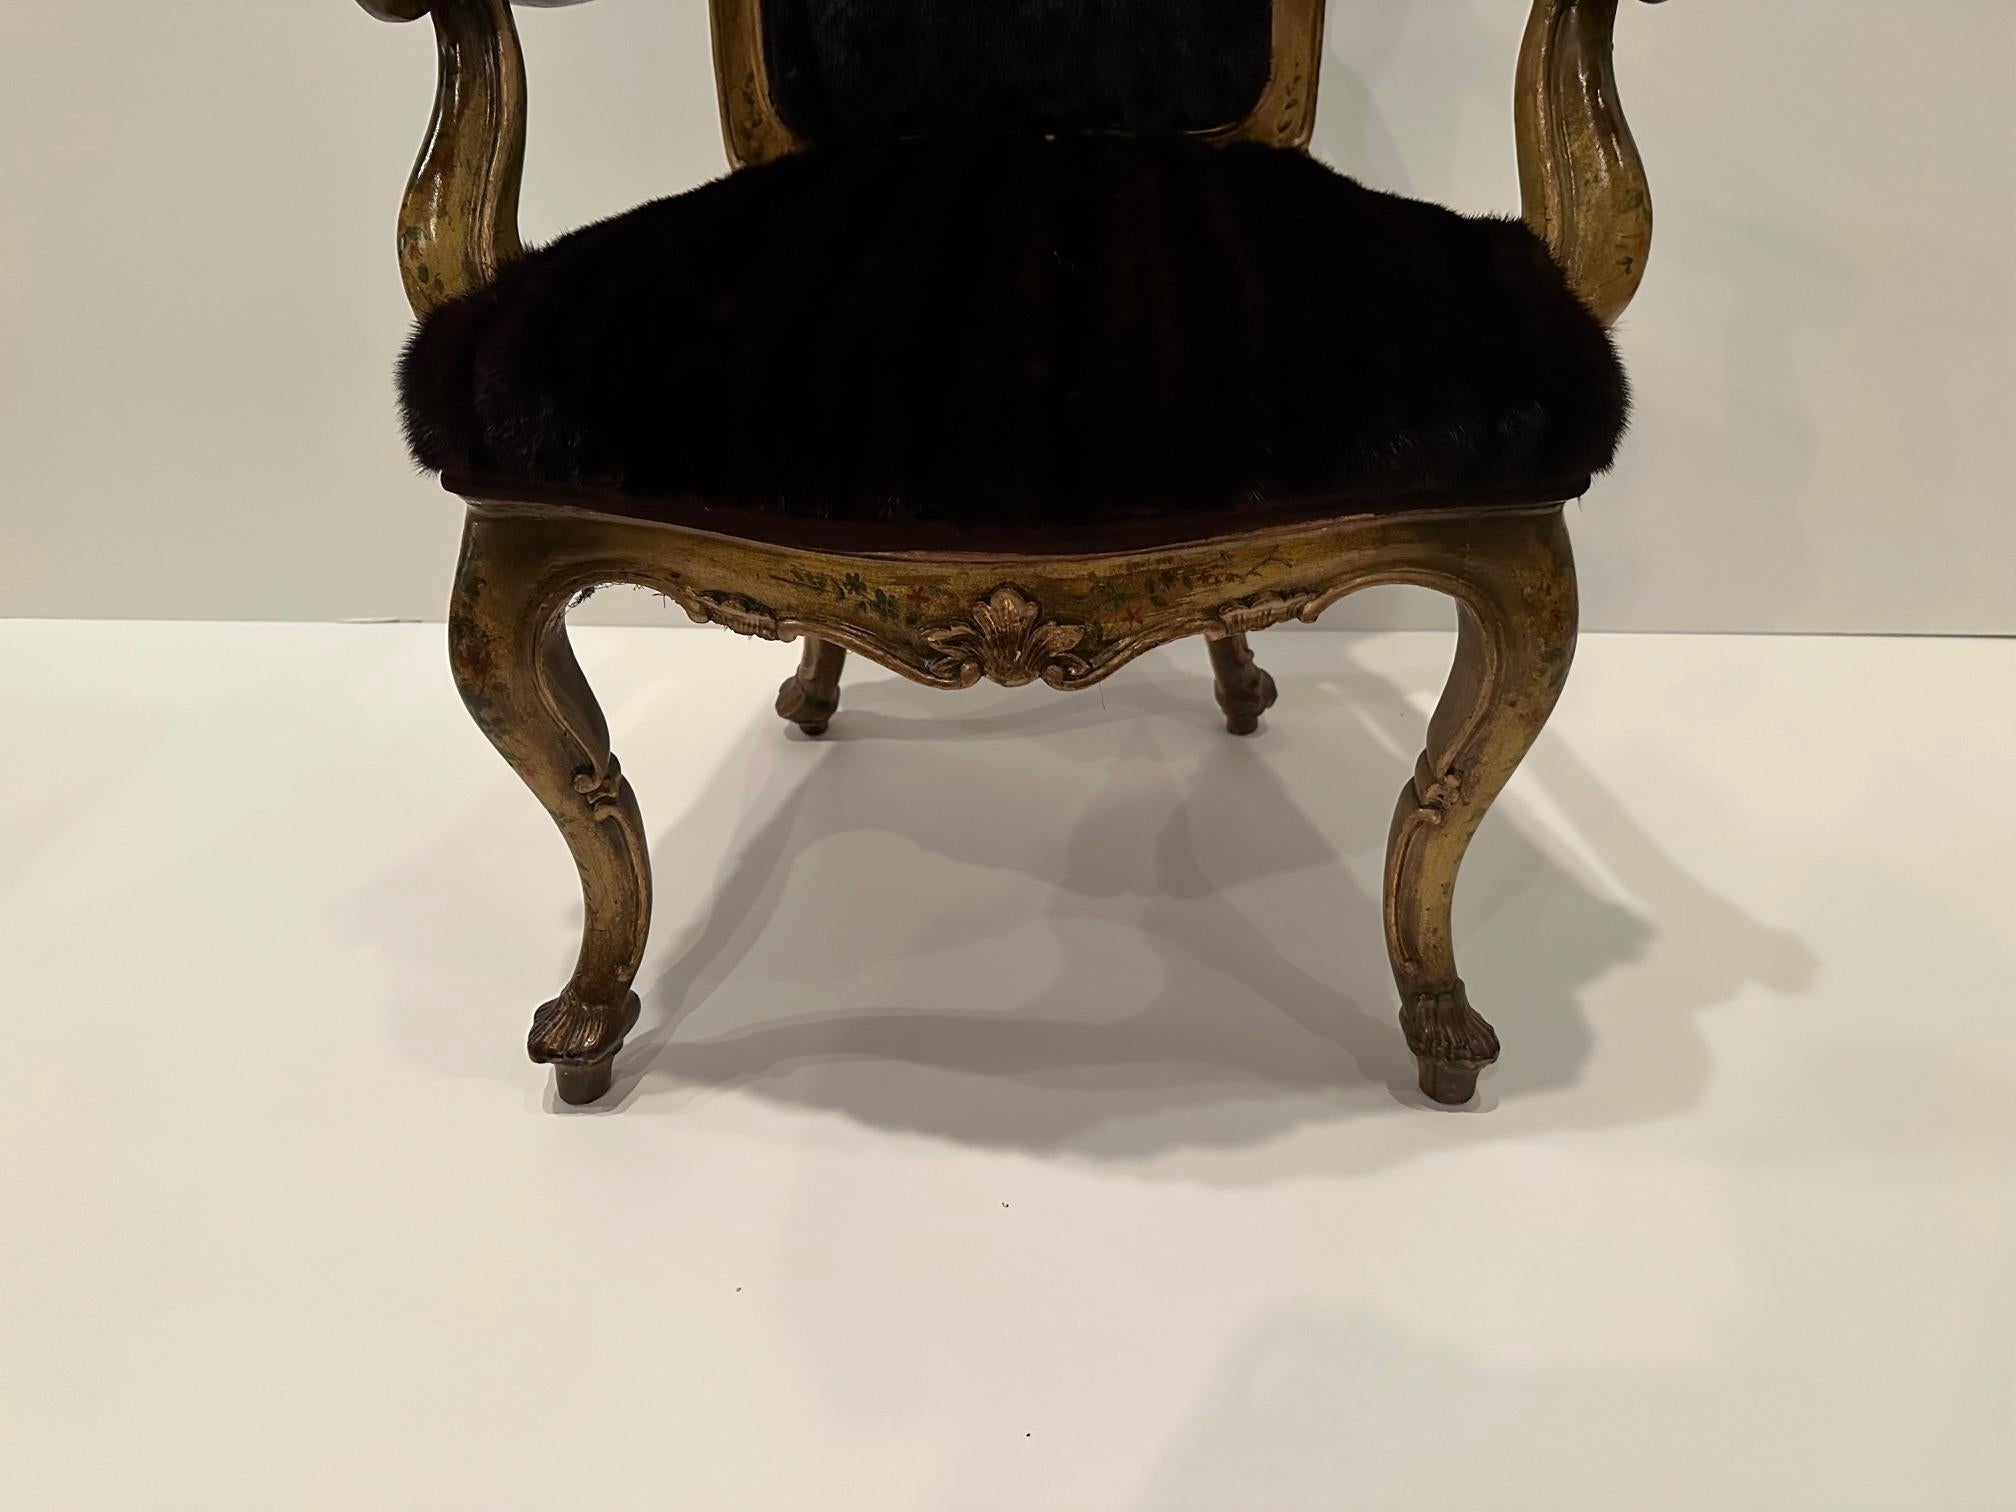 Sinfully Rich Ornate Italian Painted Venetian Armchair Upholstered in Mink Fur For Sale 1